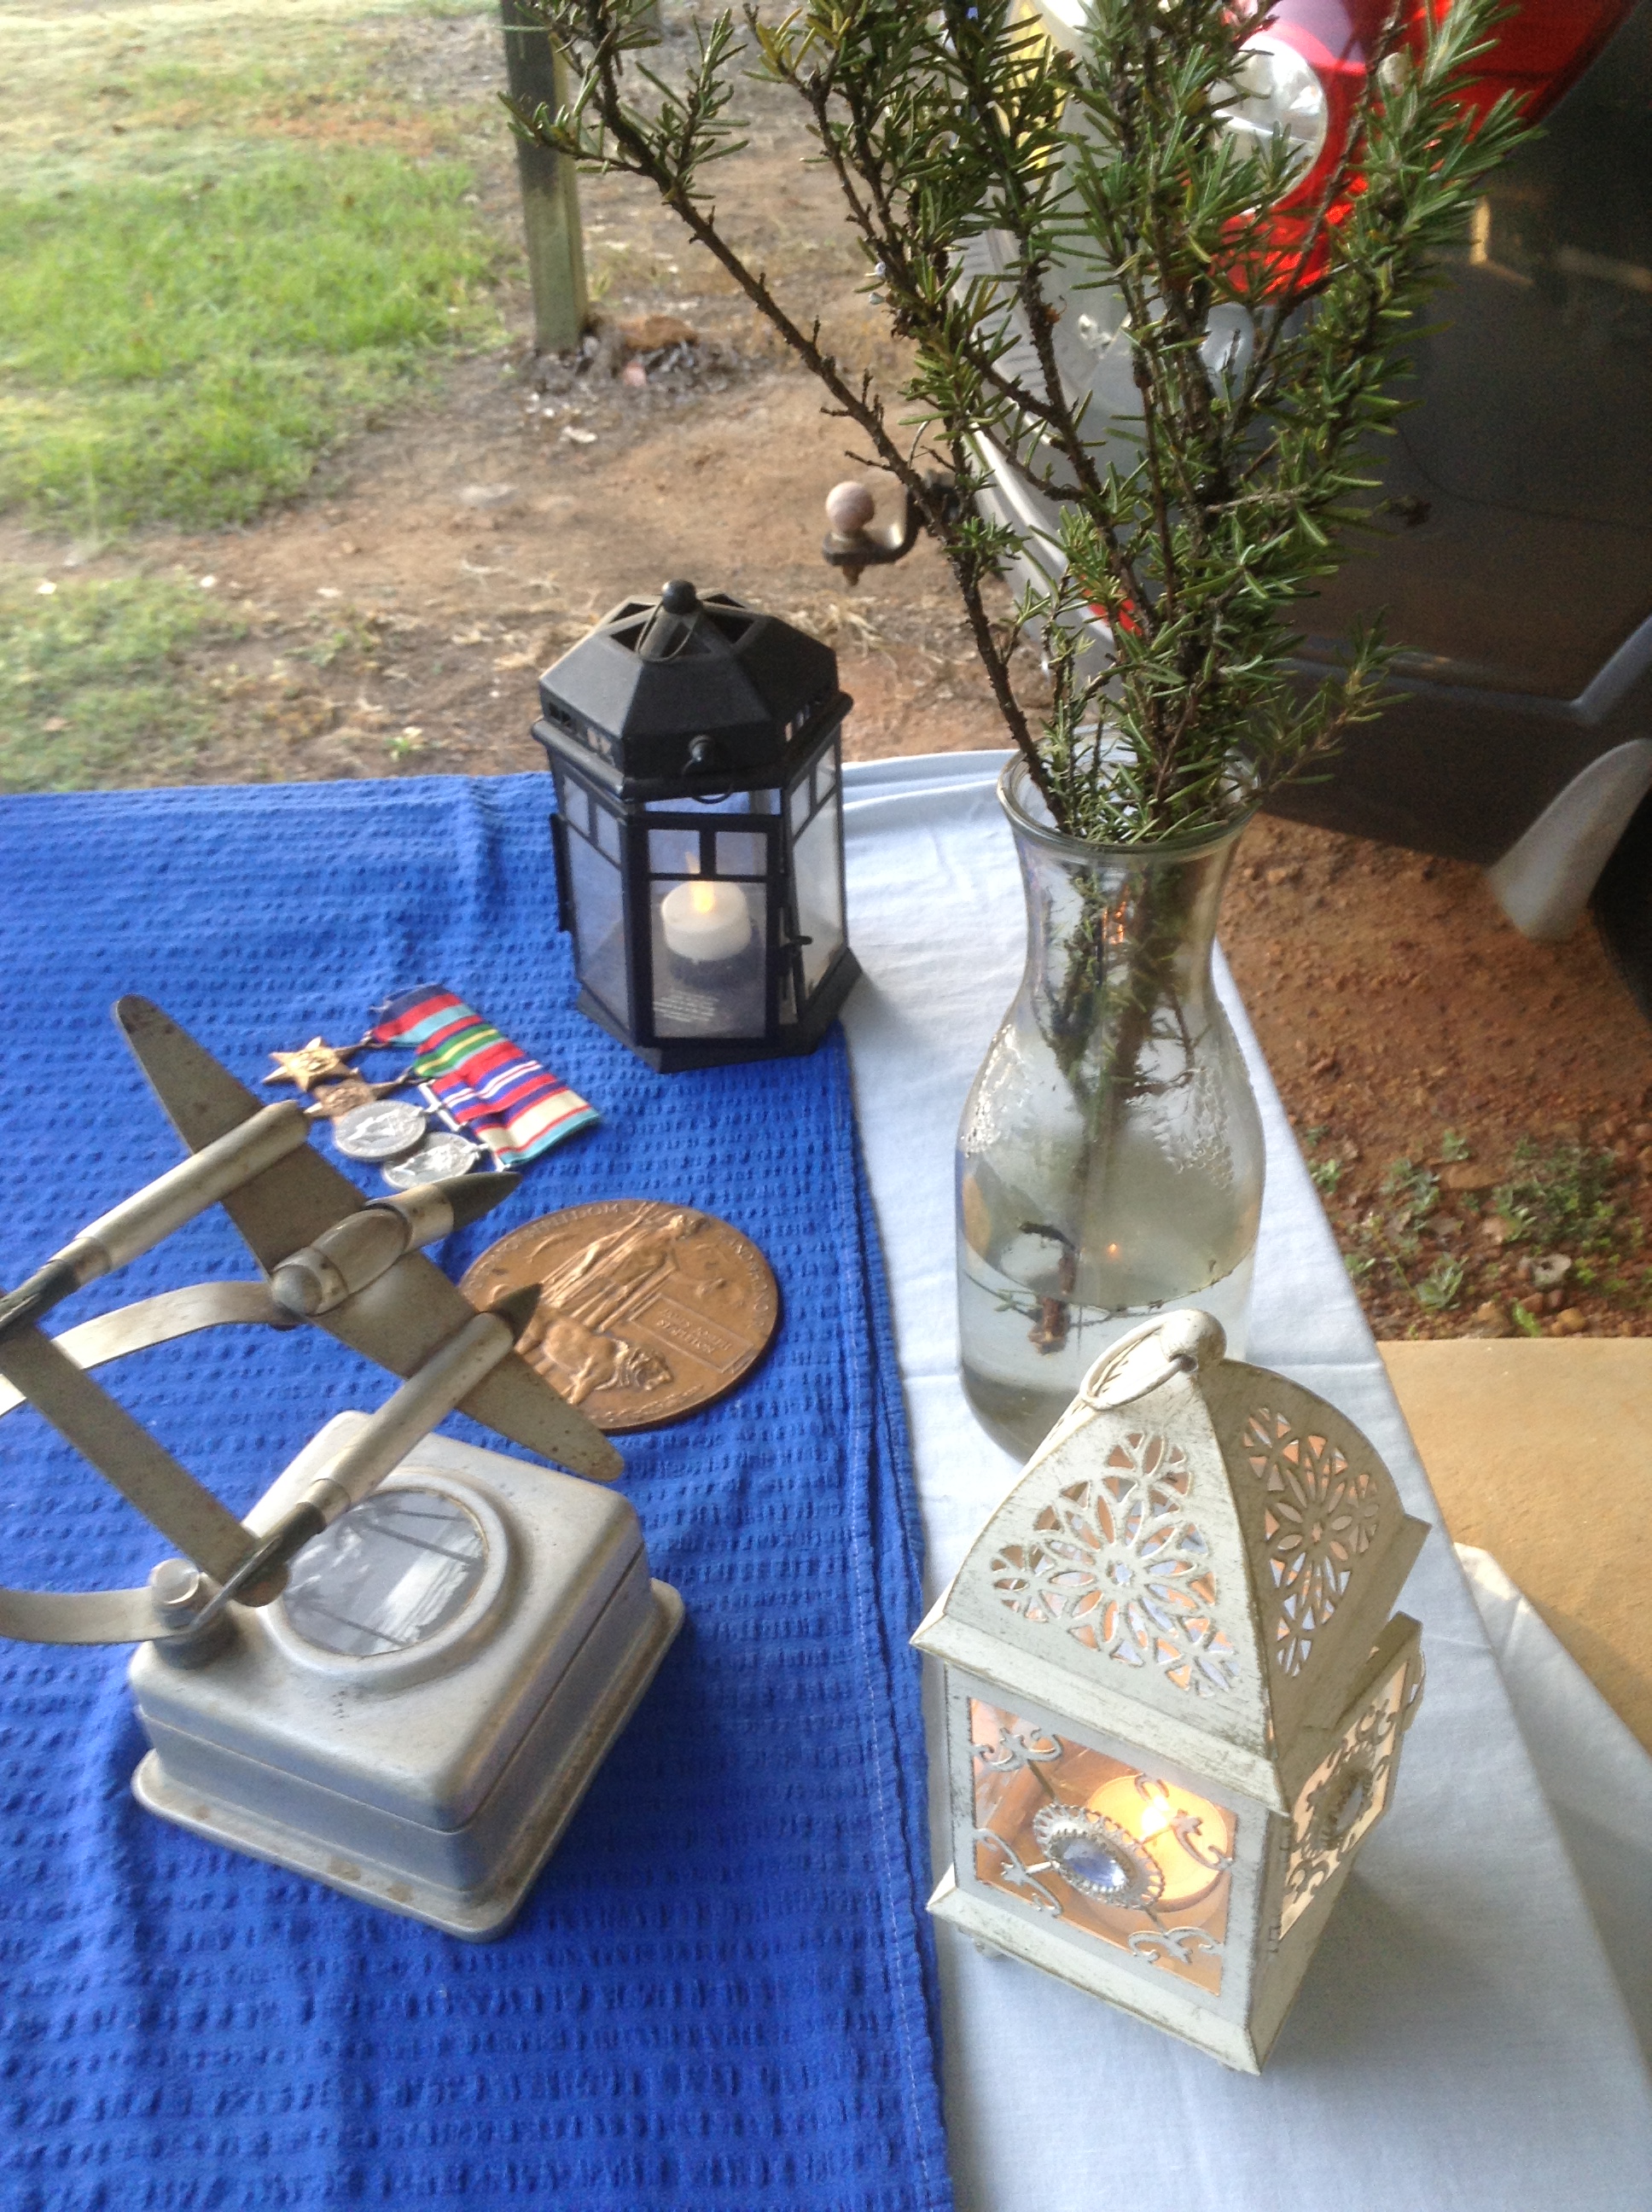 Trench Art, Medals &amp; Rosemary